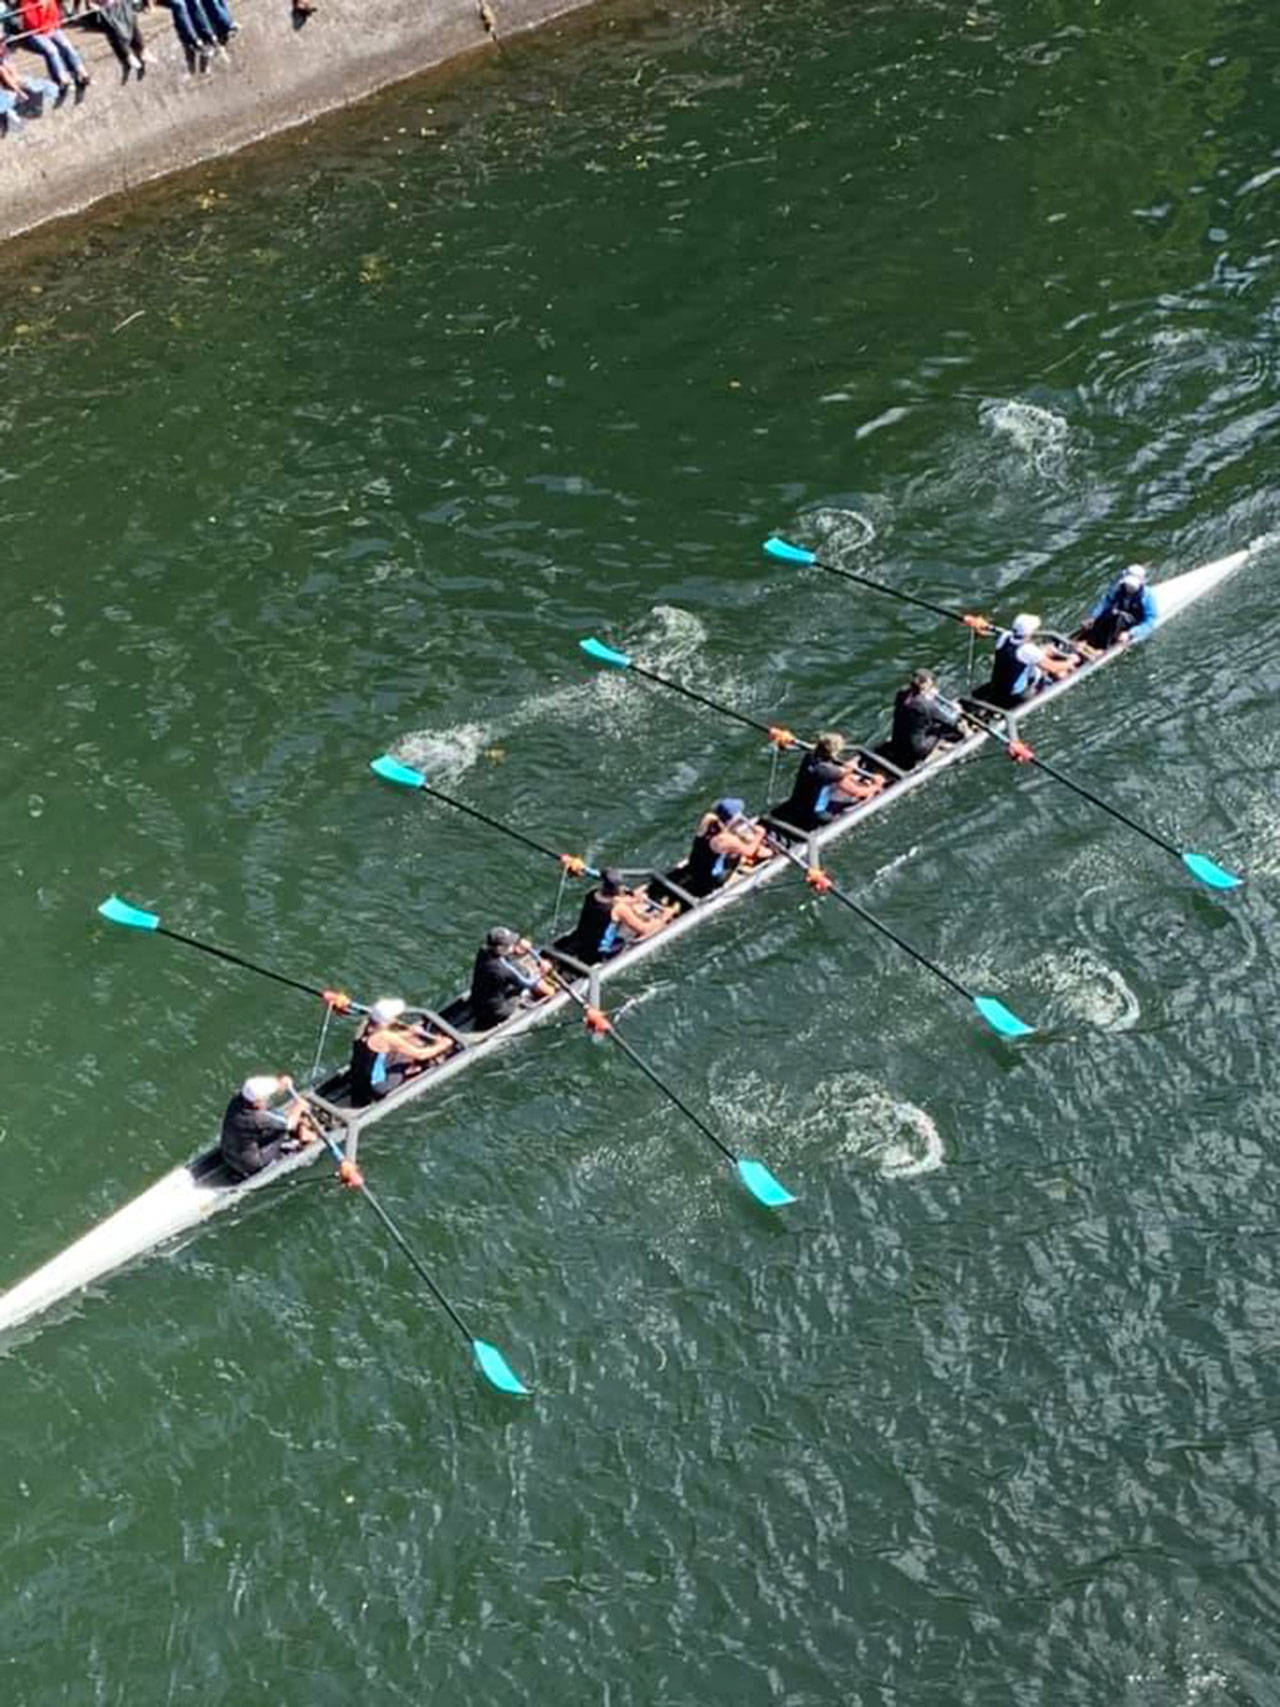 The Vashon Island Rowing Club’s masters women’s eight rows out from under the Montlake Bridge on their way to a third-place finish at last Saturday’s Opening Day regatta in Seattle. (Courtesy Photo)